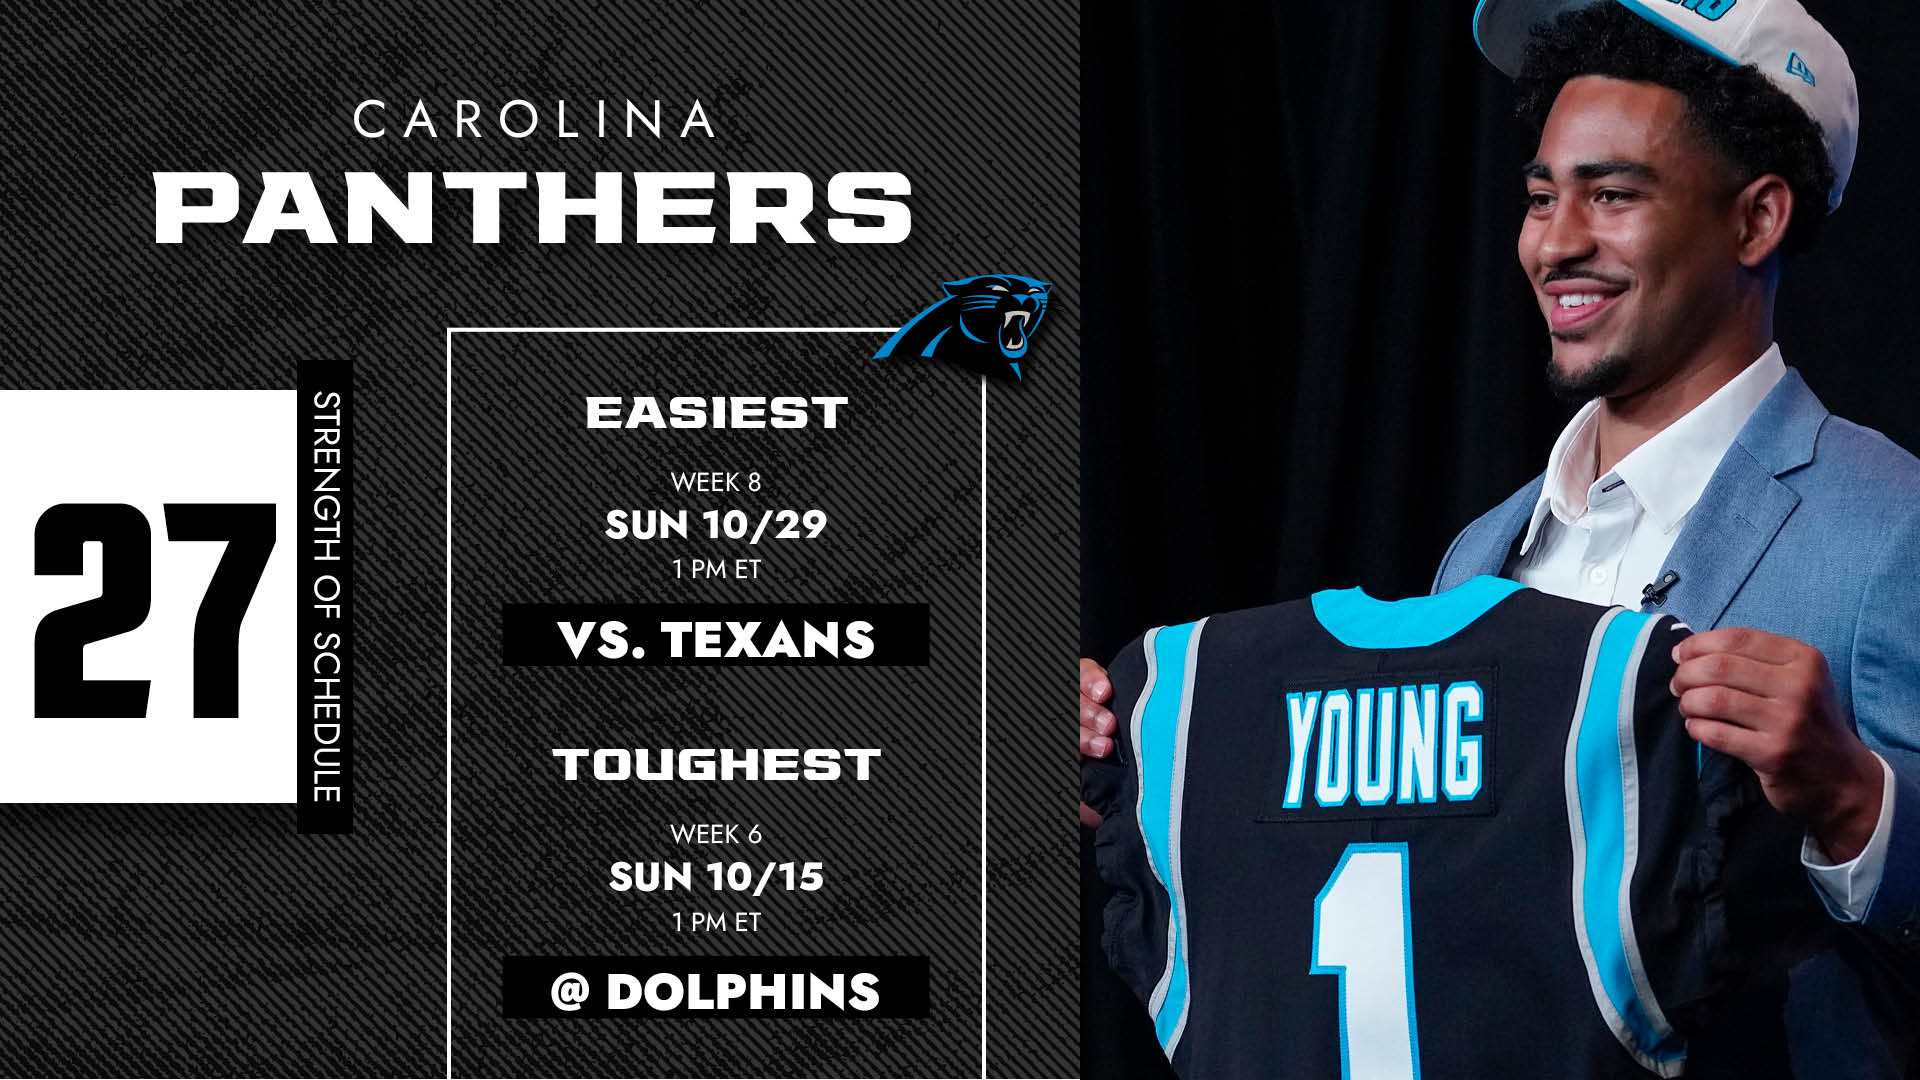 charlotte panthers schedule